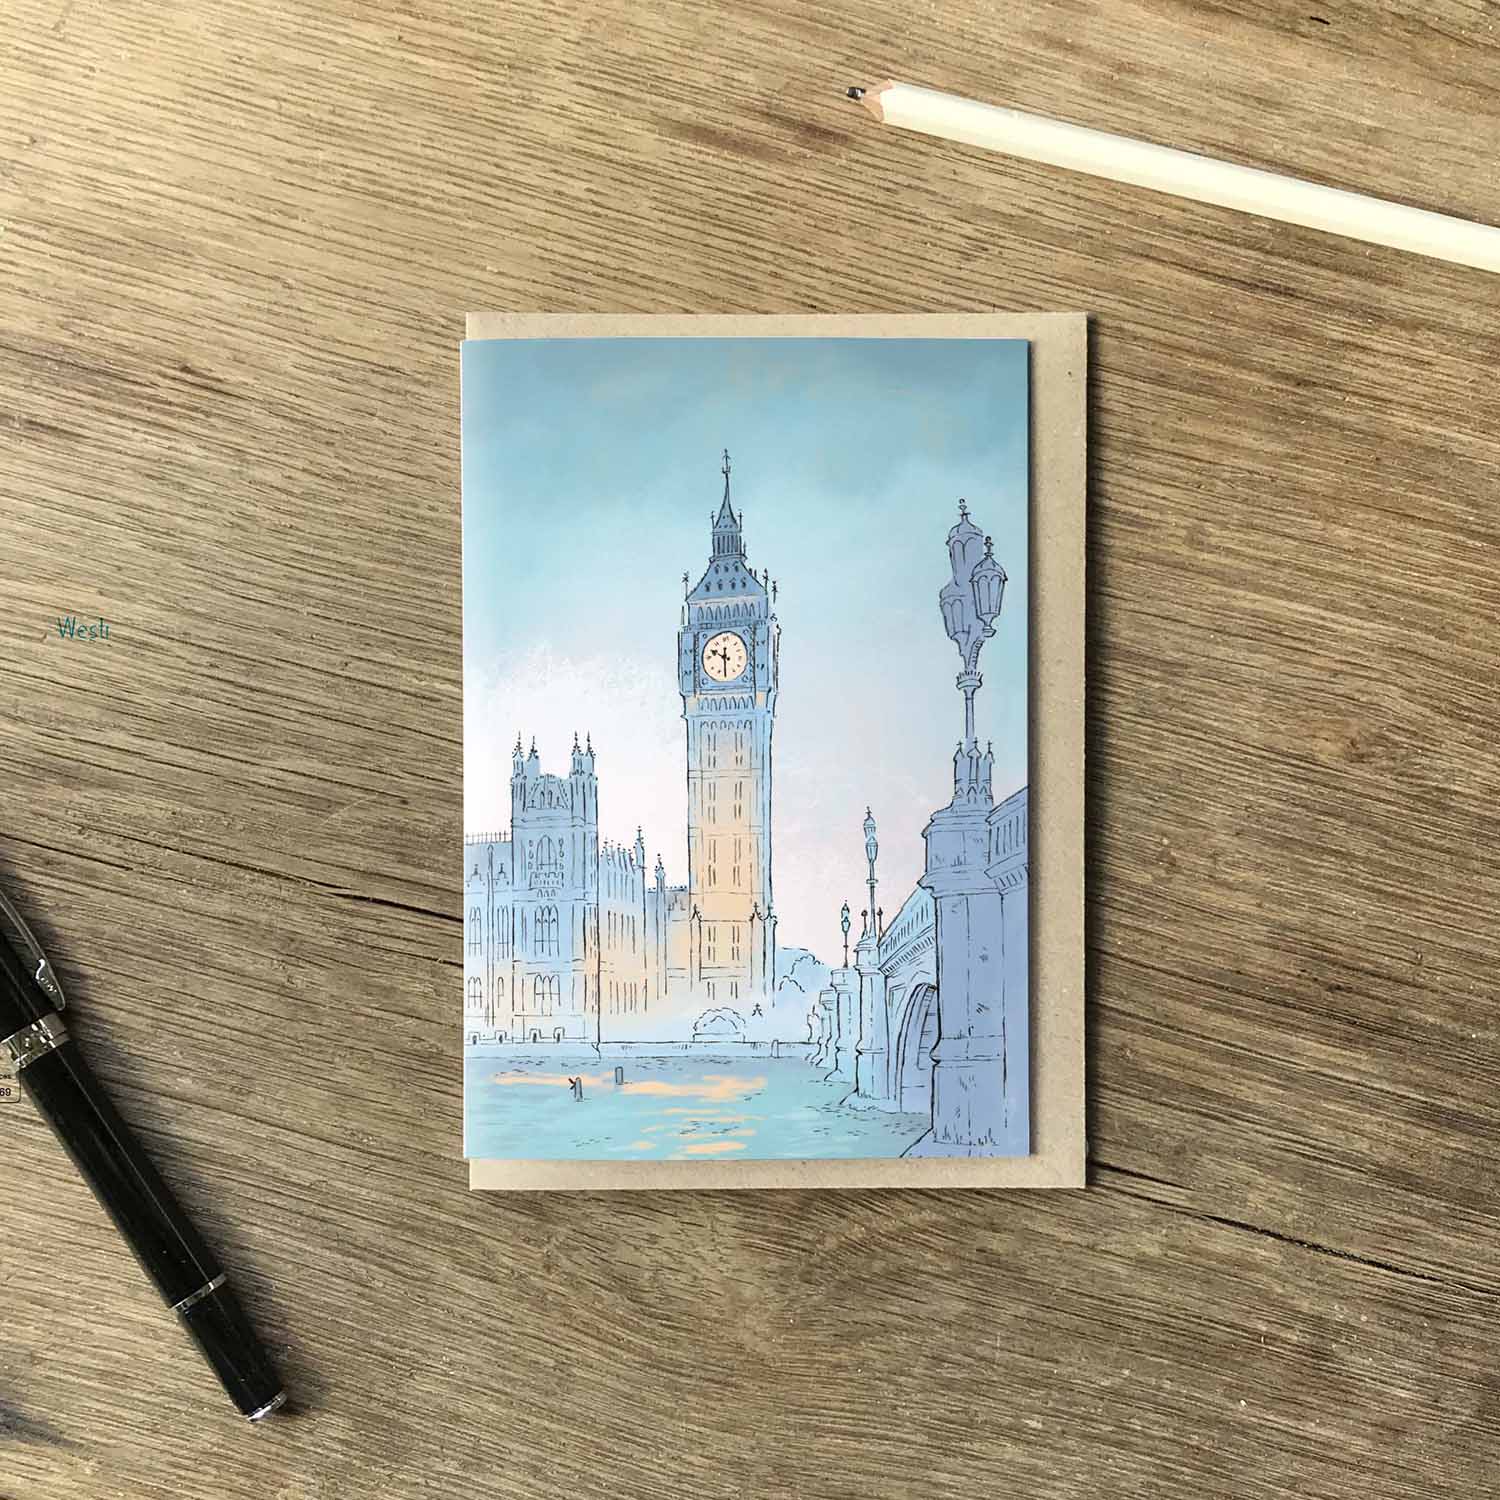 London's big ben at twilight beautifully illustrated on a greeting card by mike green illustration.